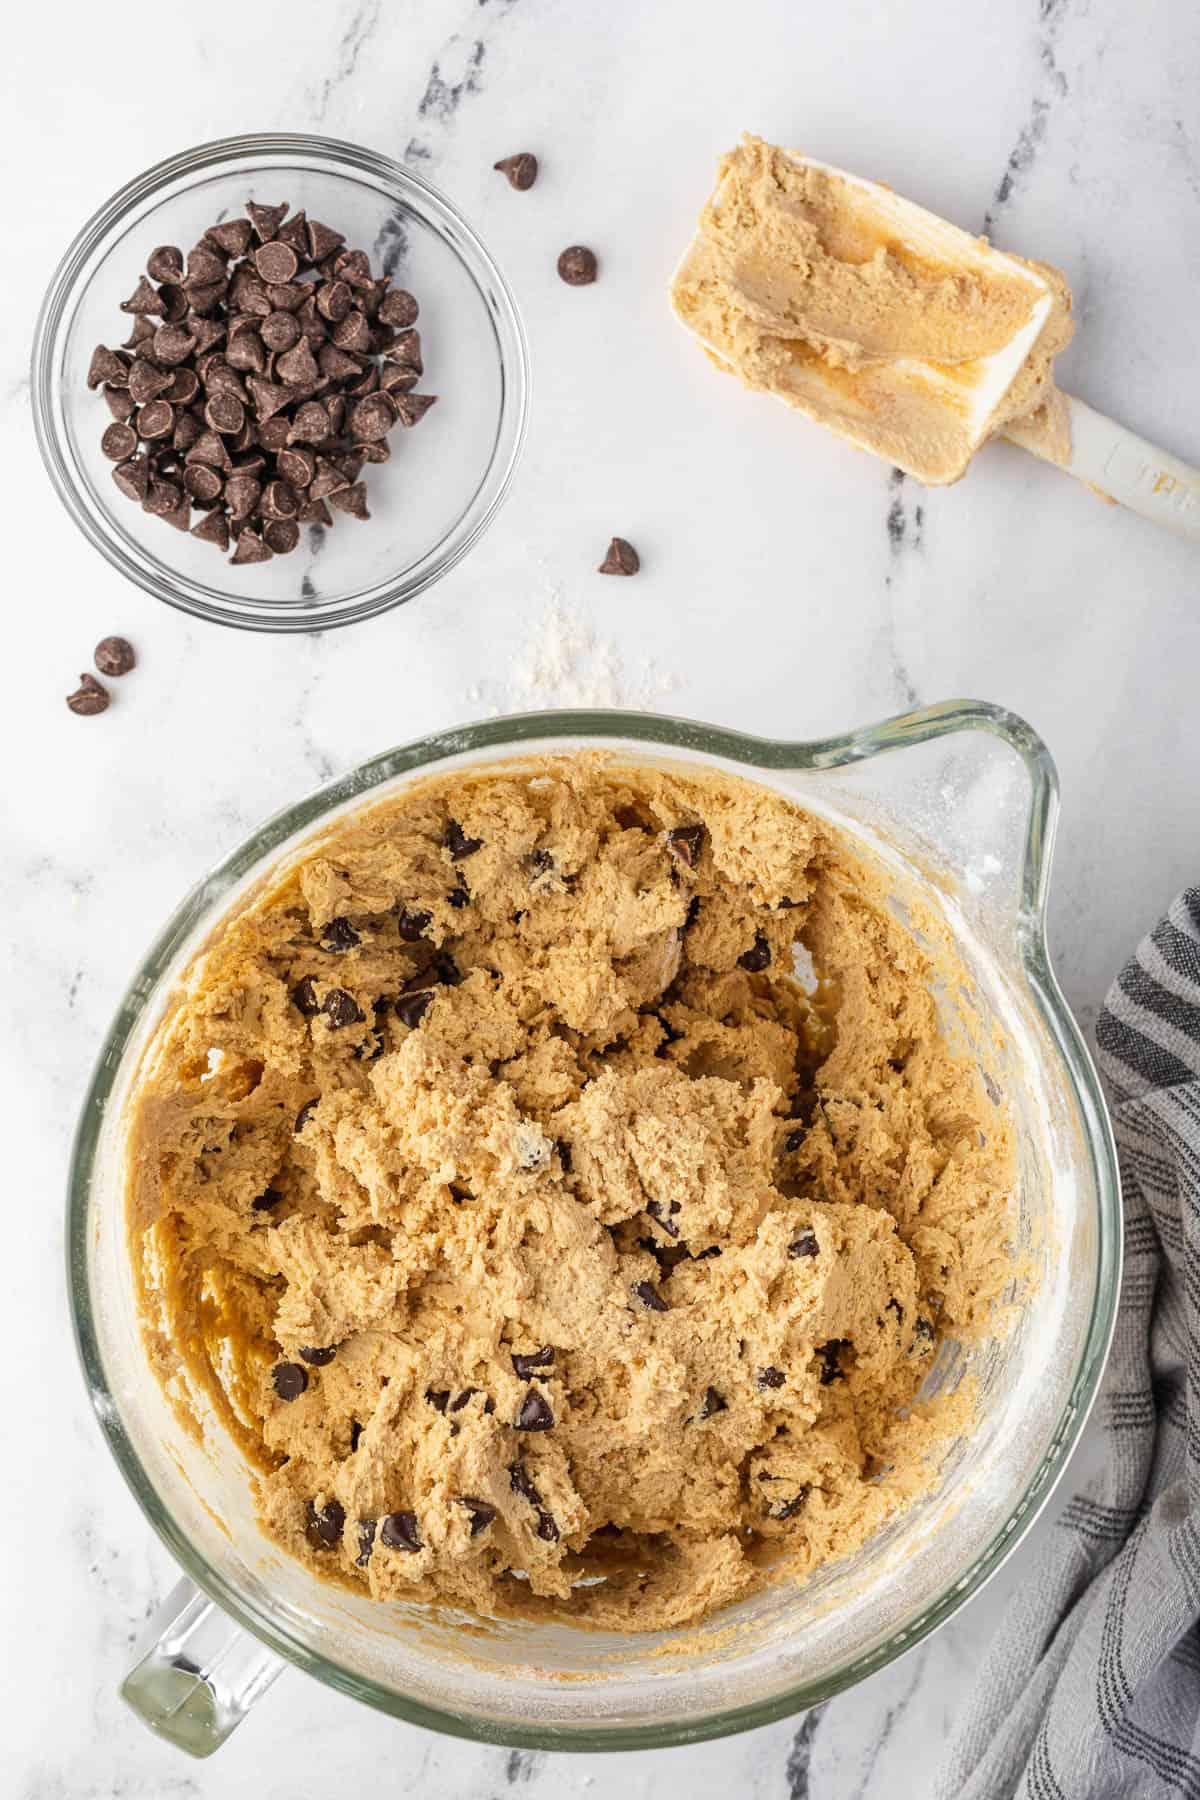 peanut butter cookie dough mixed with chocolate chips